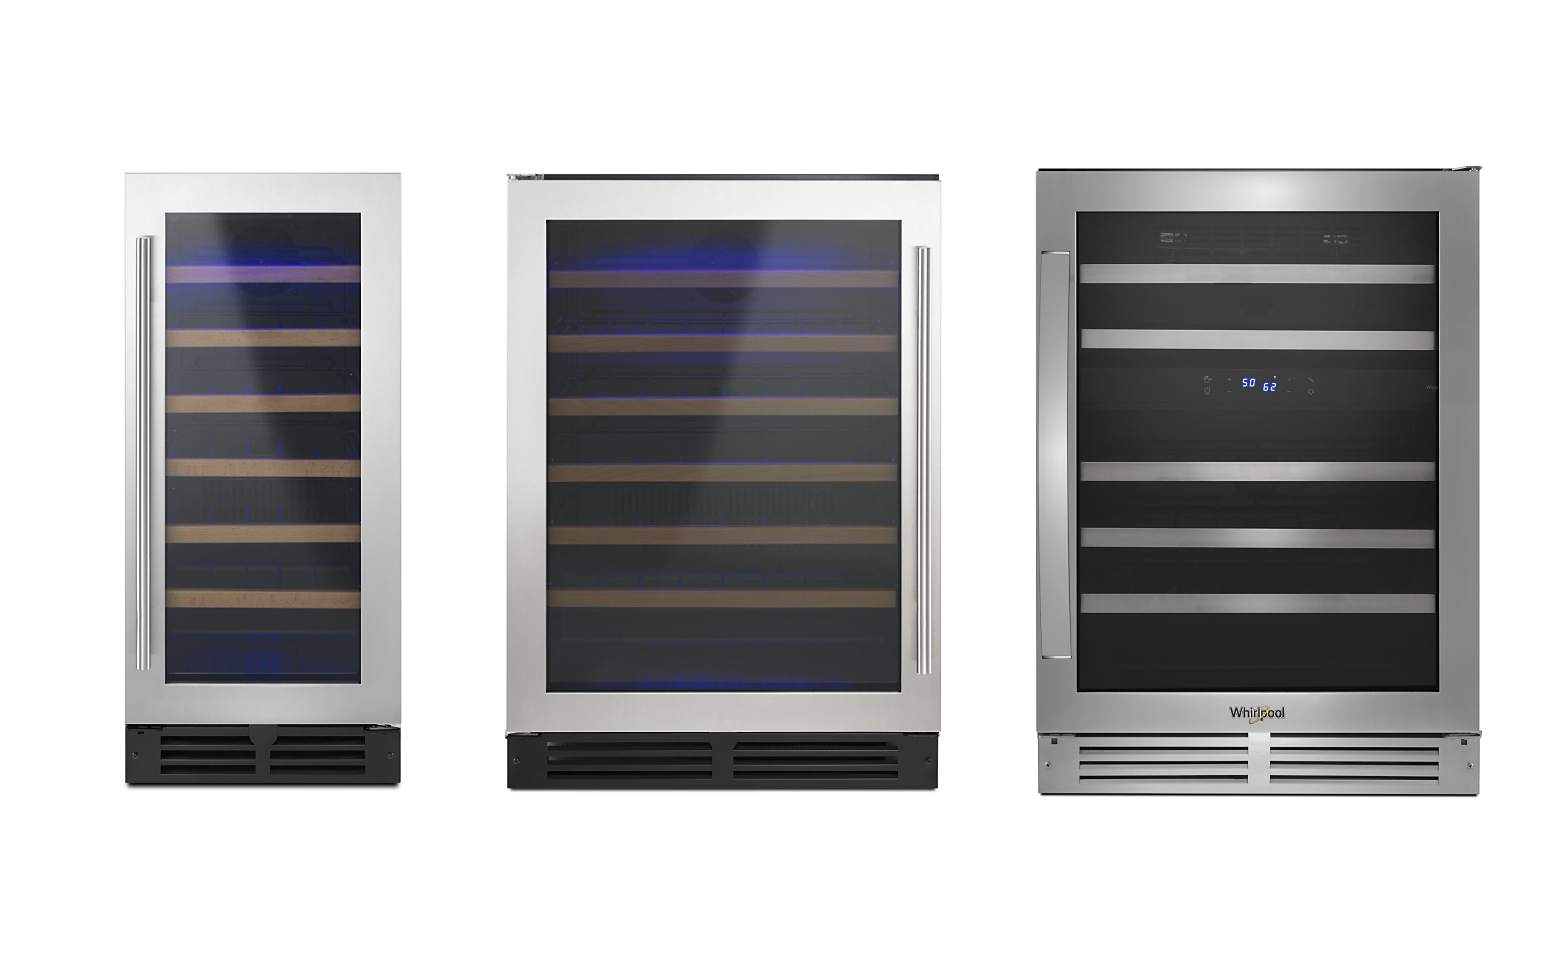 Side-by-side comparison of small, medium and large-sized wine refrigerators